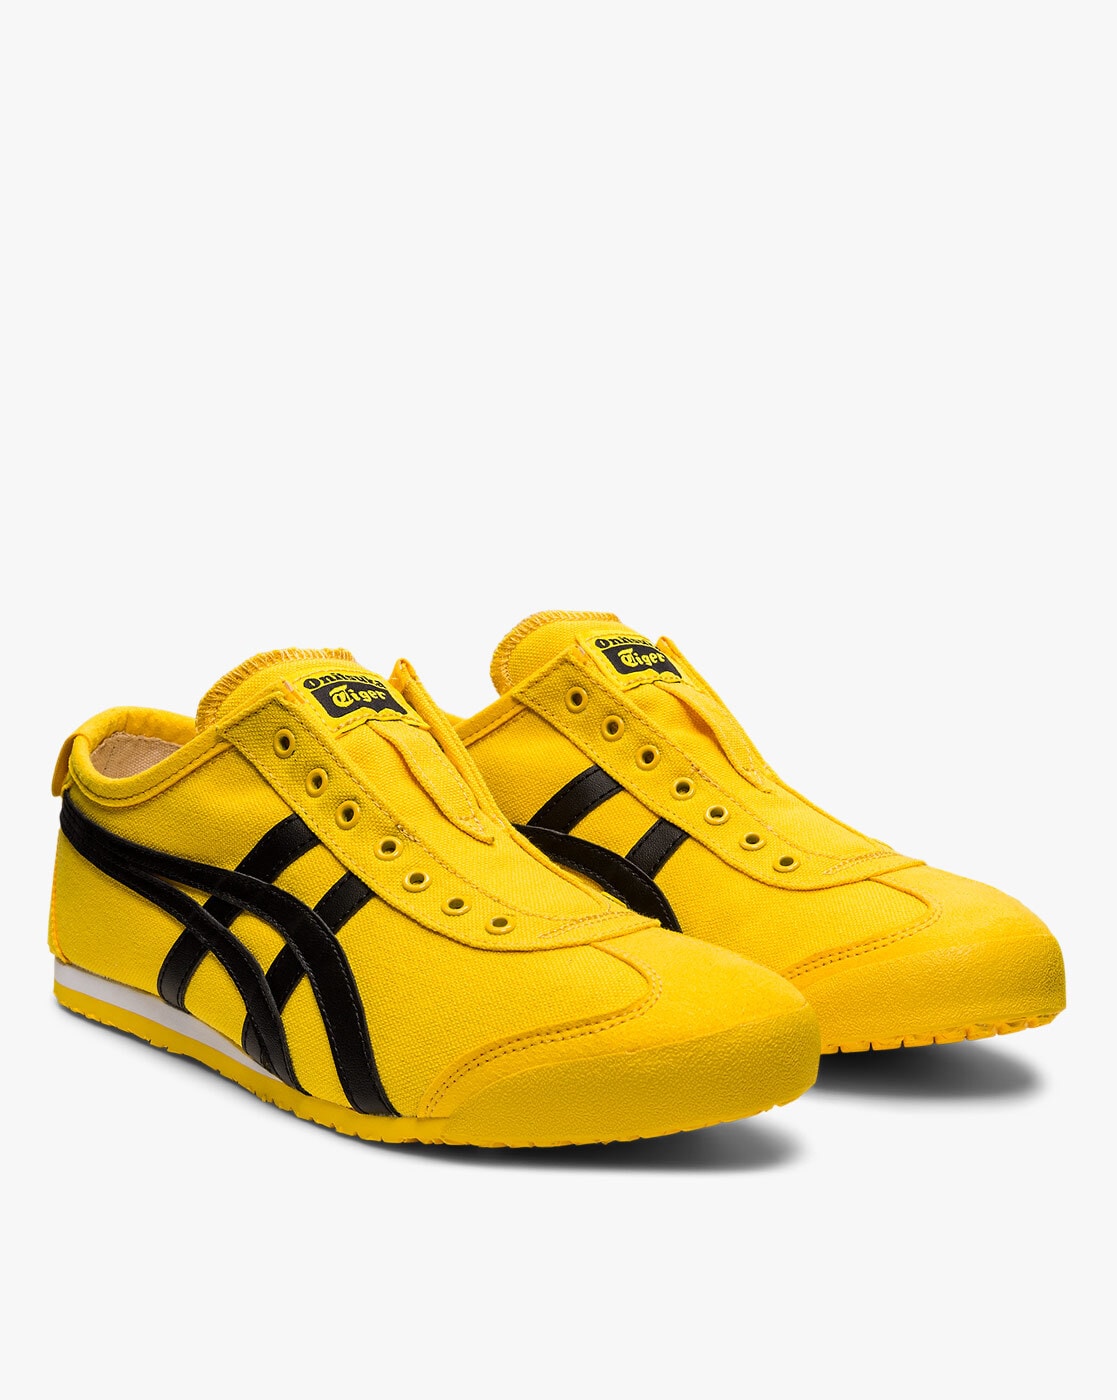 Onitsuka Tiger Mexico 66 Sneakers In 50 Colors (only $80) RunRepeat ...